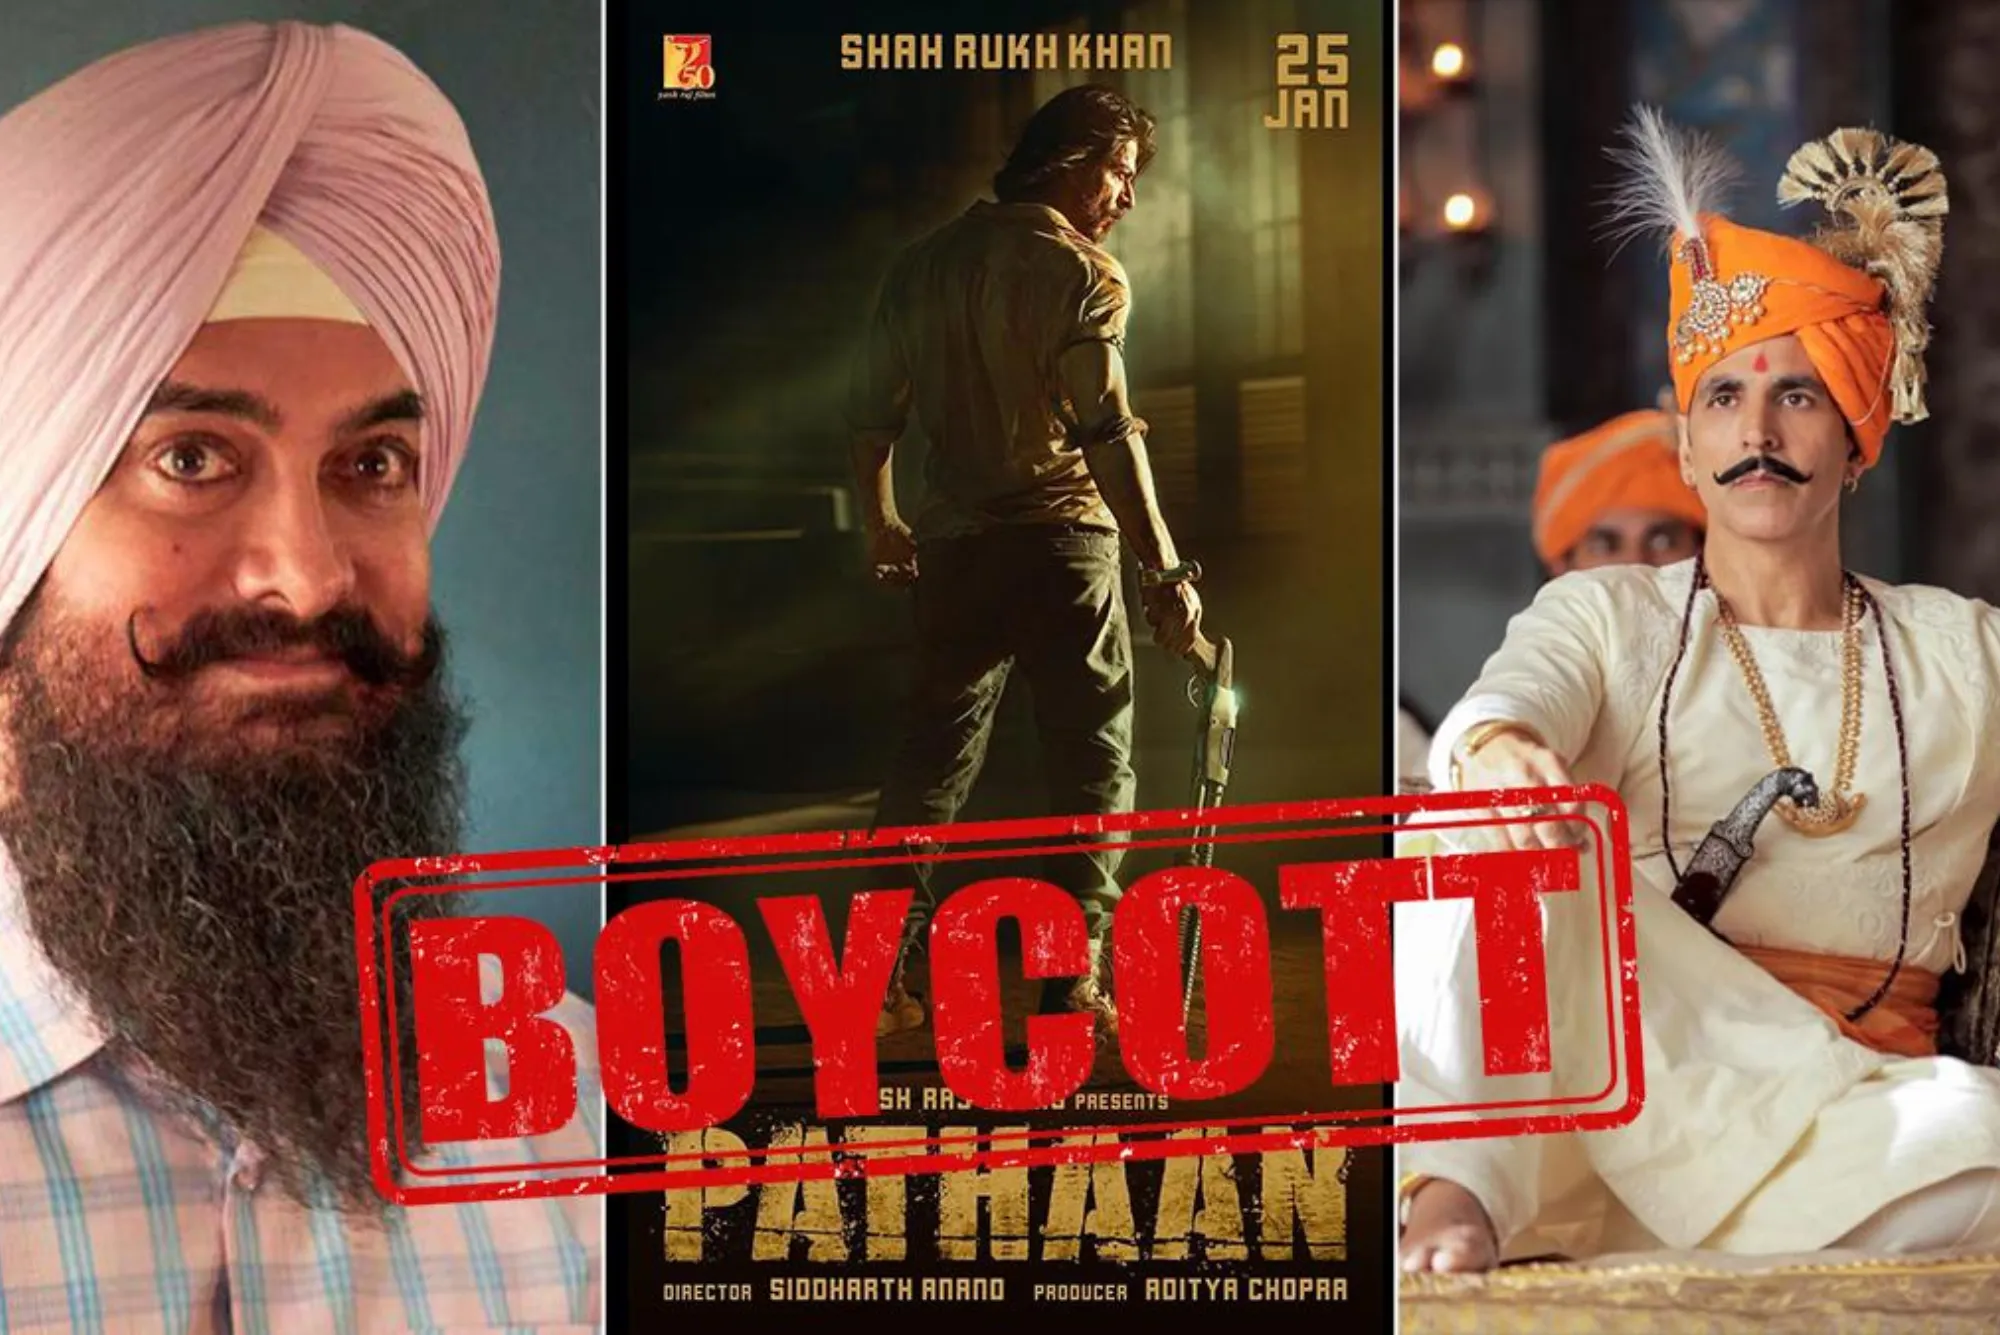 Why Bollywood Movies Are Boycotted